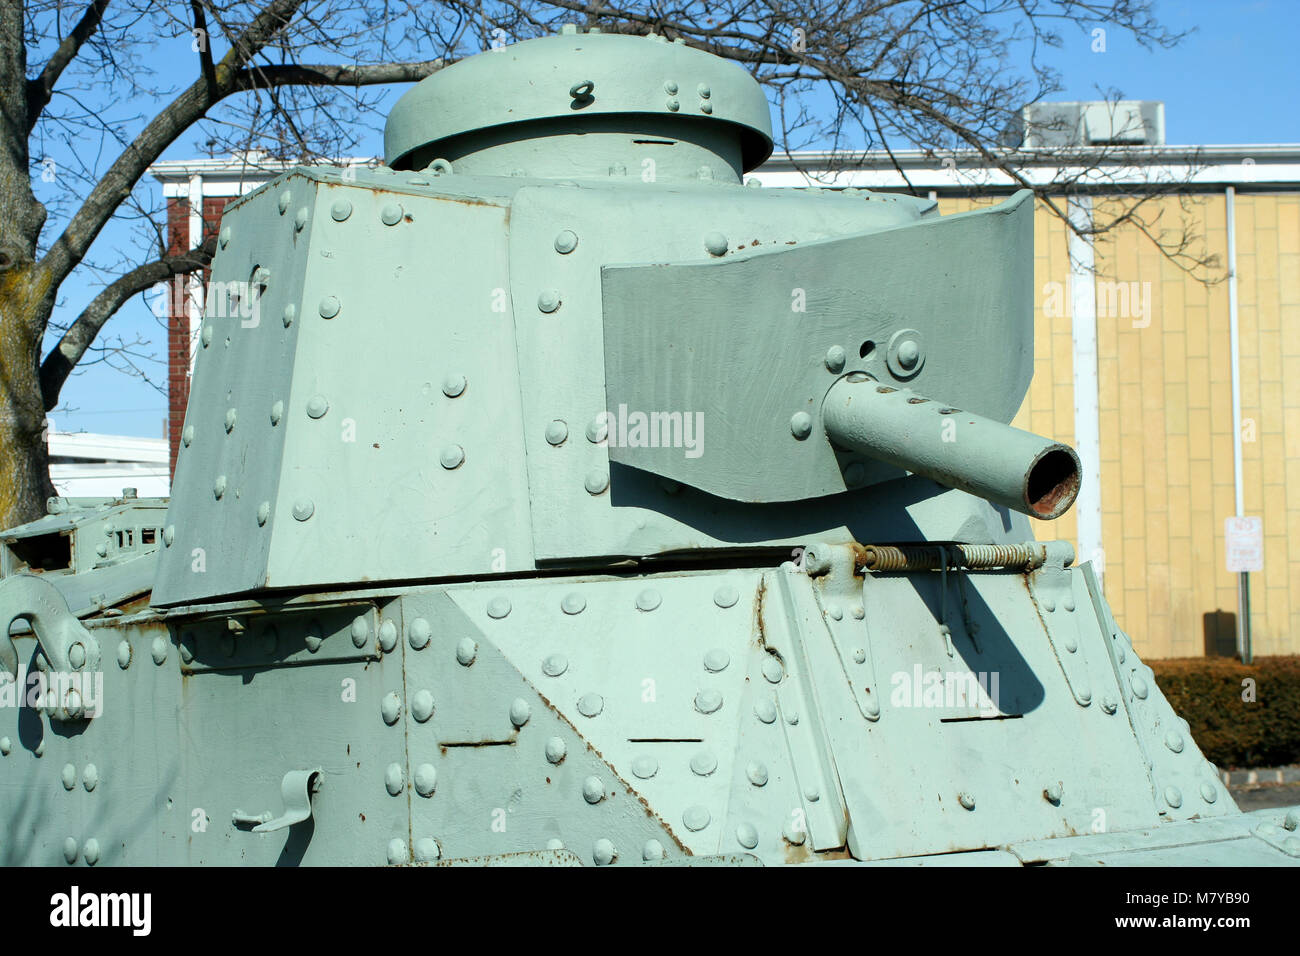 A Old green military tank turret Stock Photo